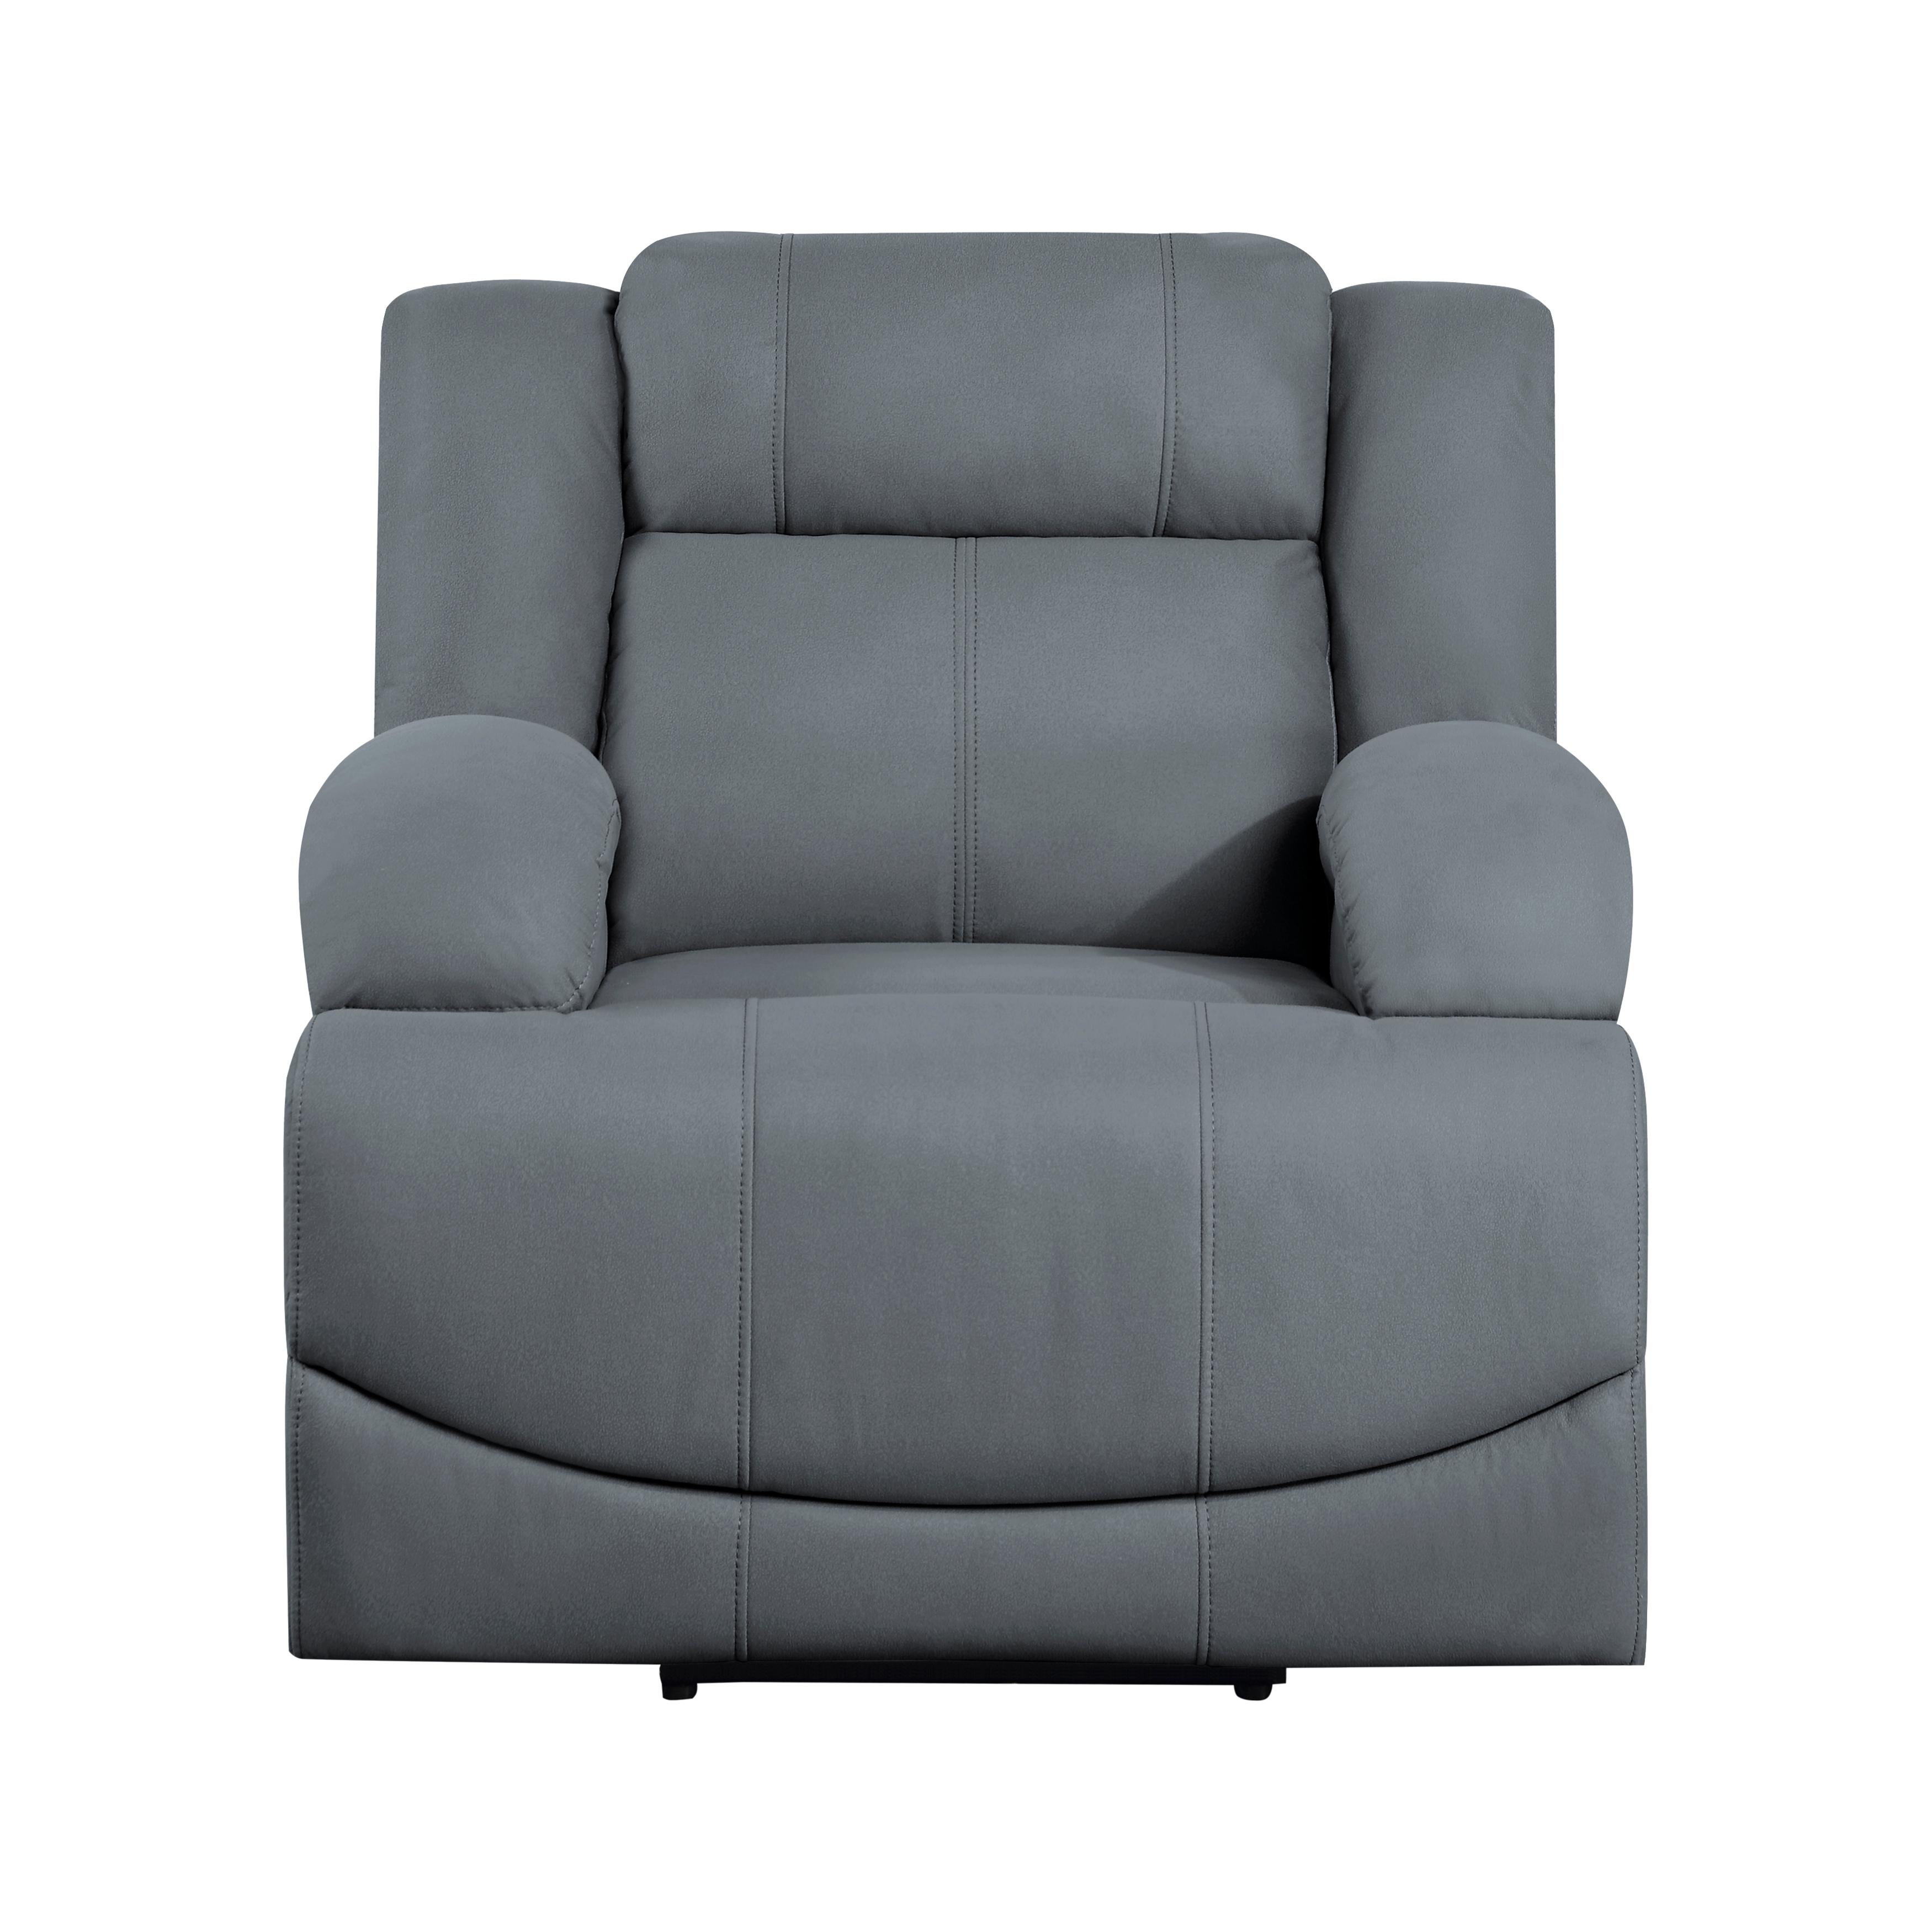 Transitional Power Reclining Chair 9207GPB-1PW Camryn 9207GPB-1PW in Blue Microfiber